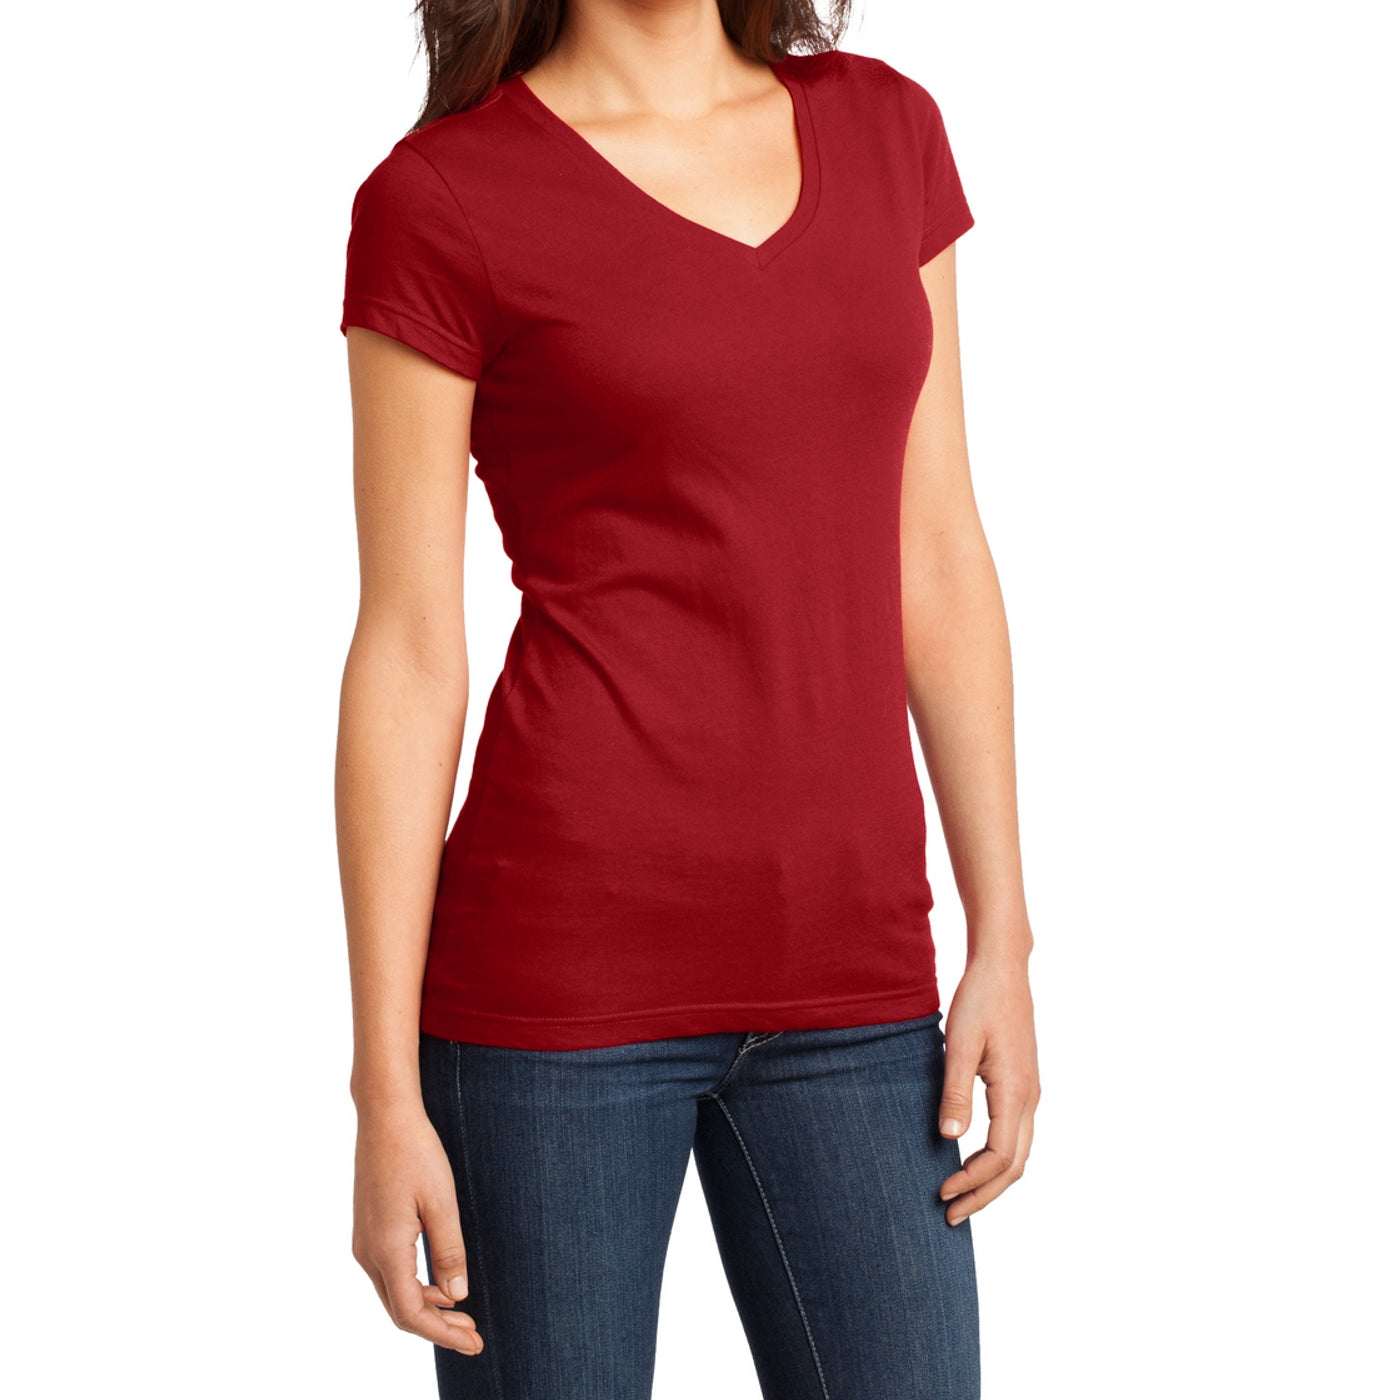 Women's Juniors Very Important Tee V-Neck - Classic Red